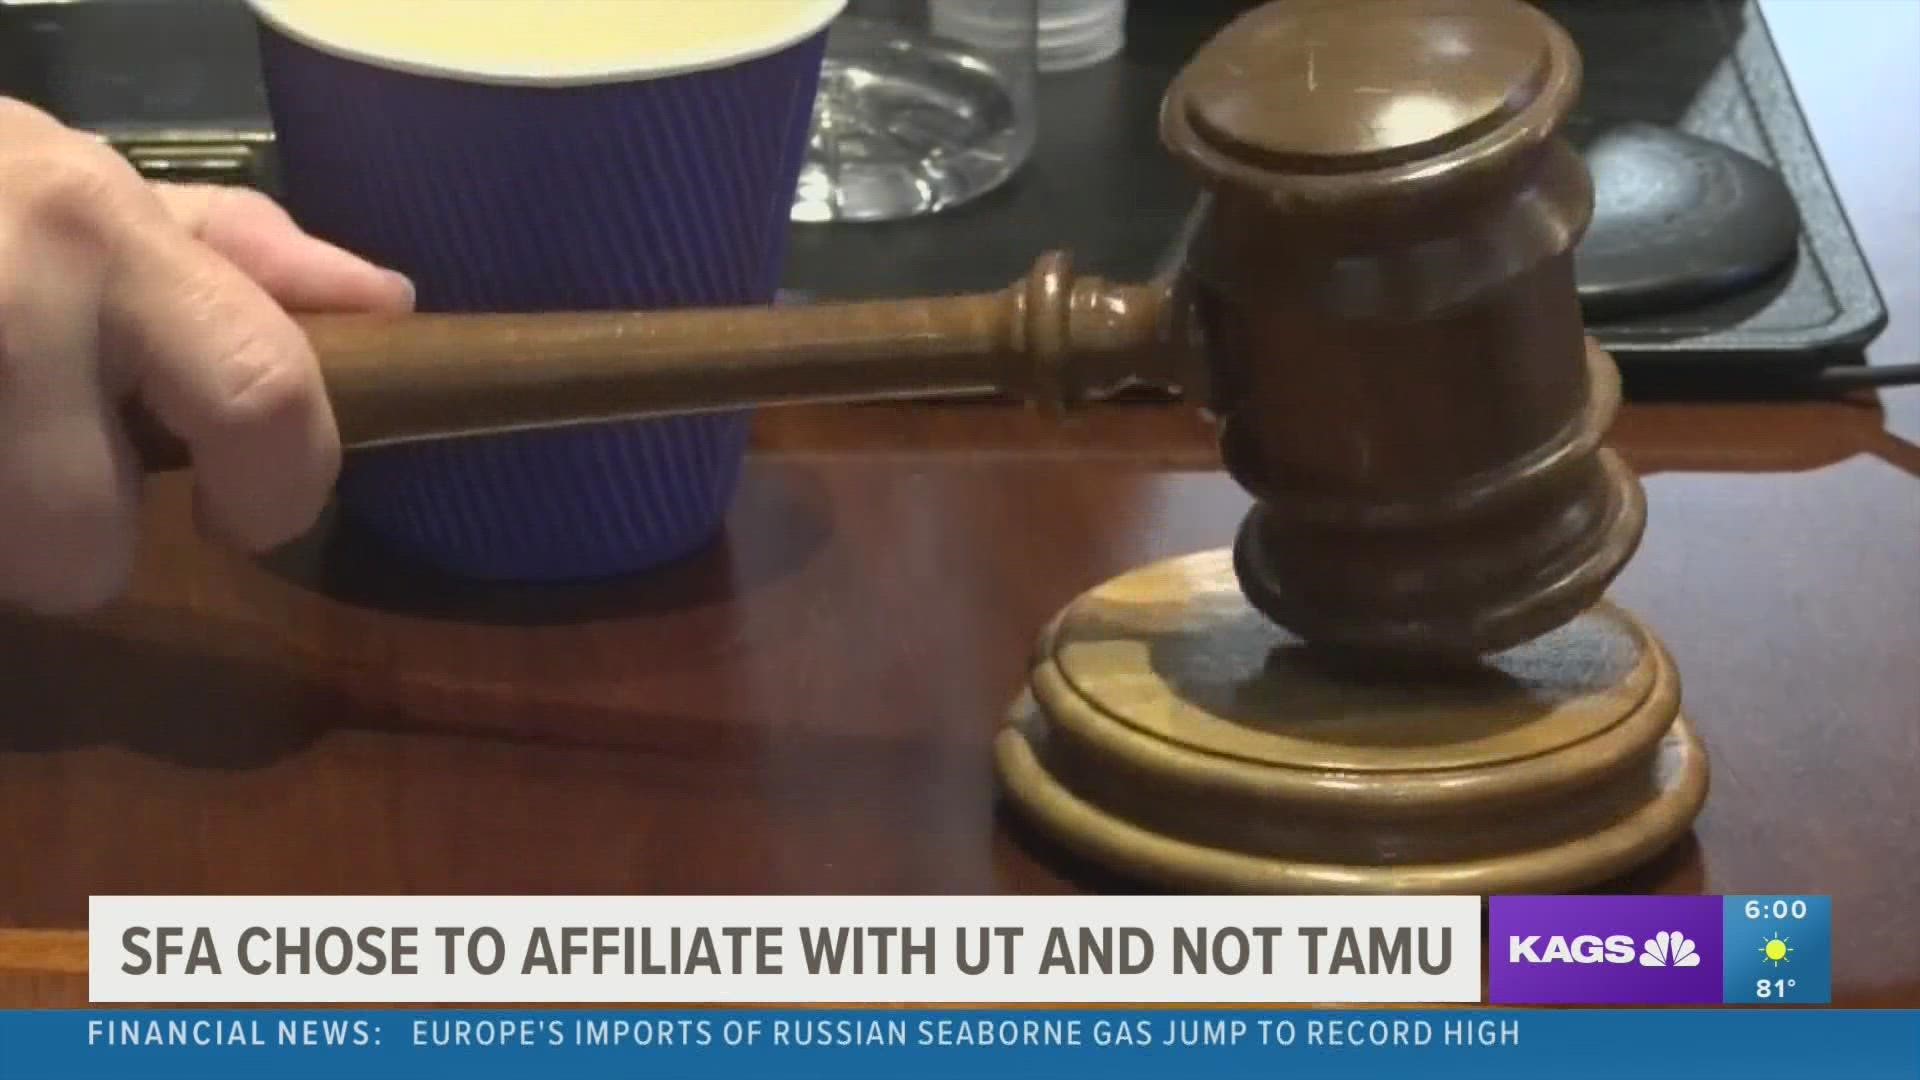 The decision was an 8-1 vote to join the University of Texas university system over Texas A&M, despite a number of board members being Aggie alumni.